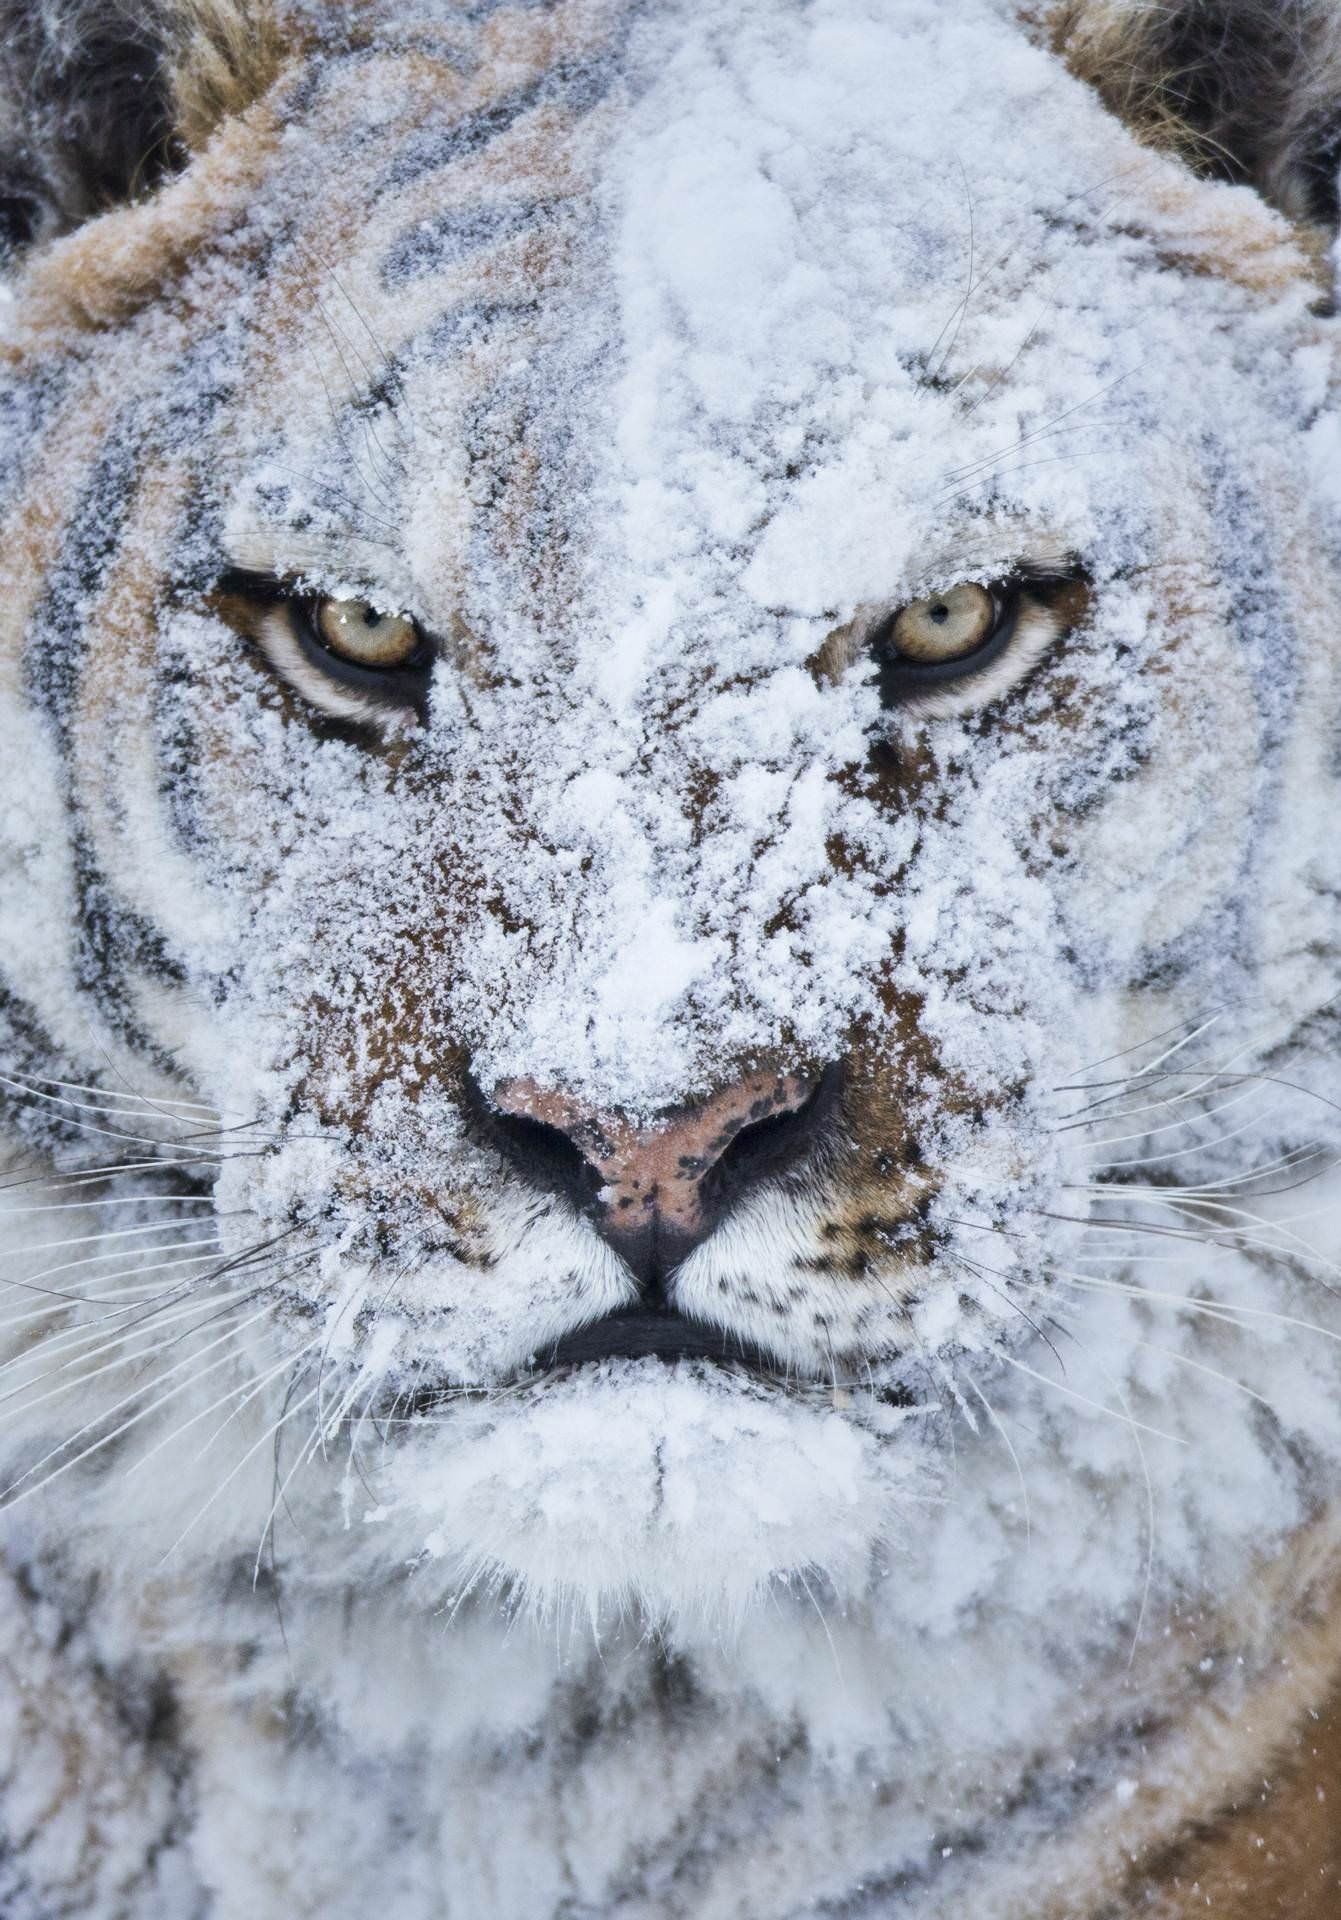 Tiger Not Taking It Well After Snowball To The Face.